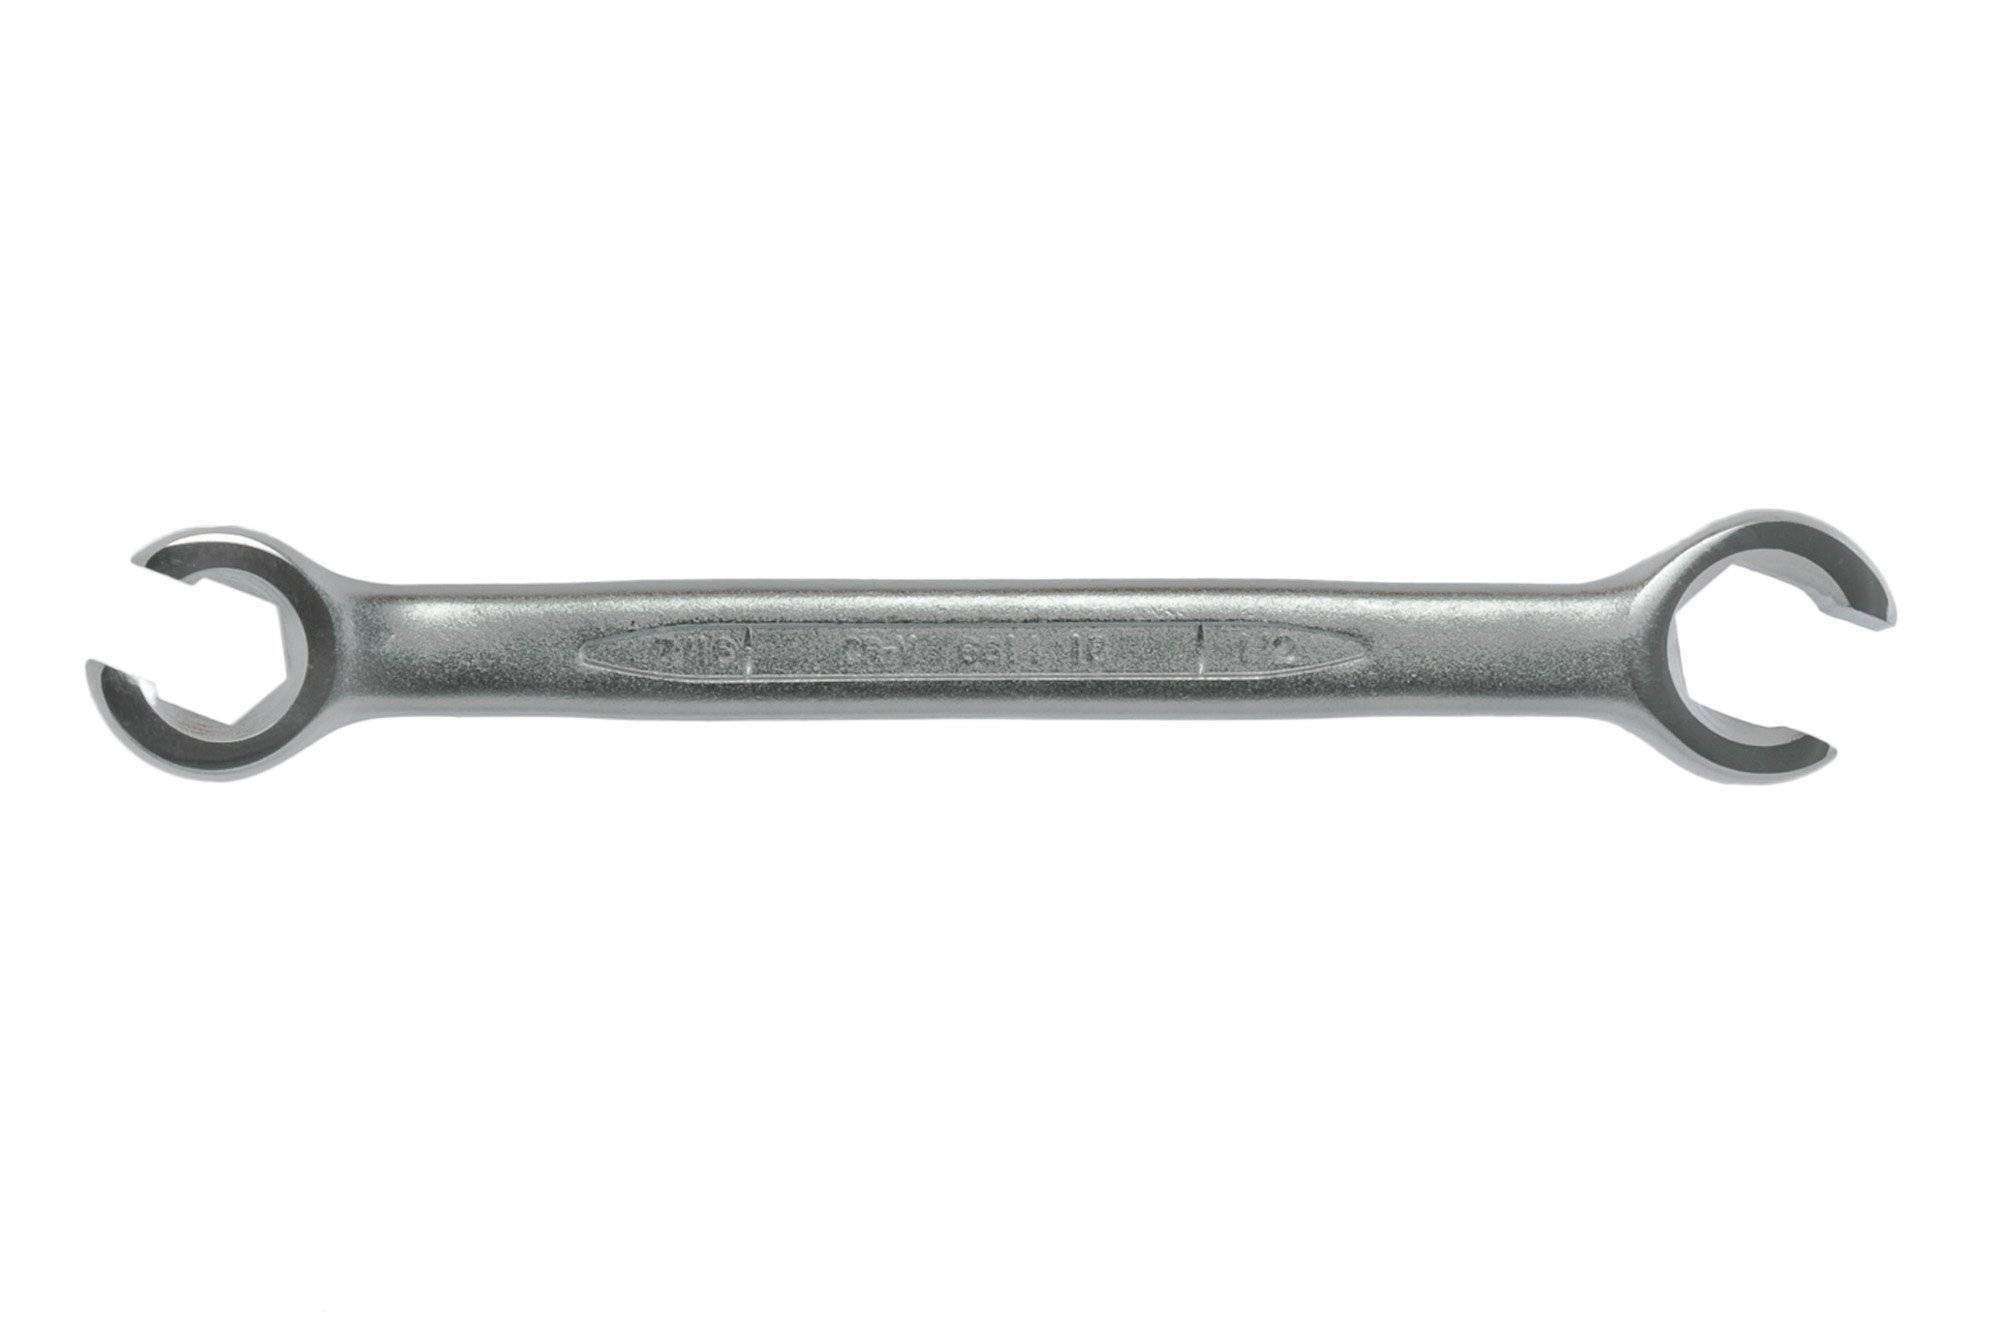 Teng Tools 7/16 Inch x 1/2 Inch Drive Double Flare Nut Wrench - 661416